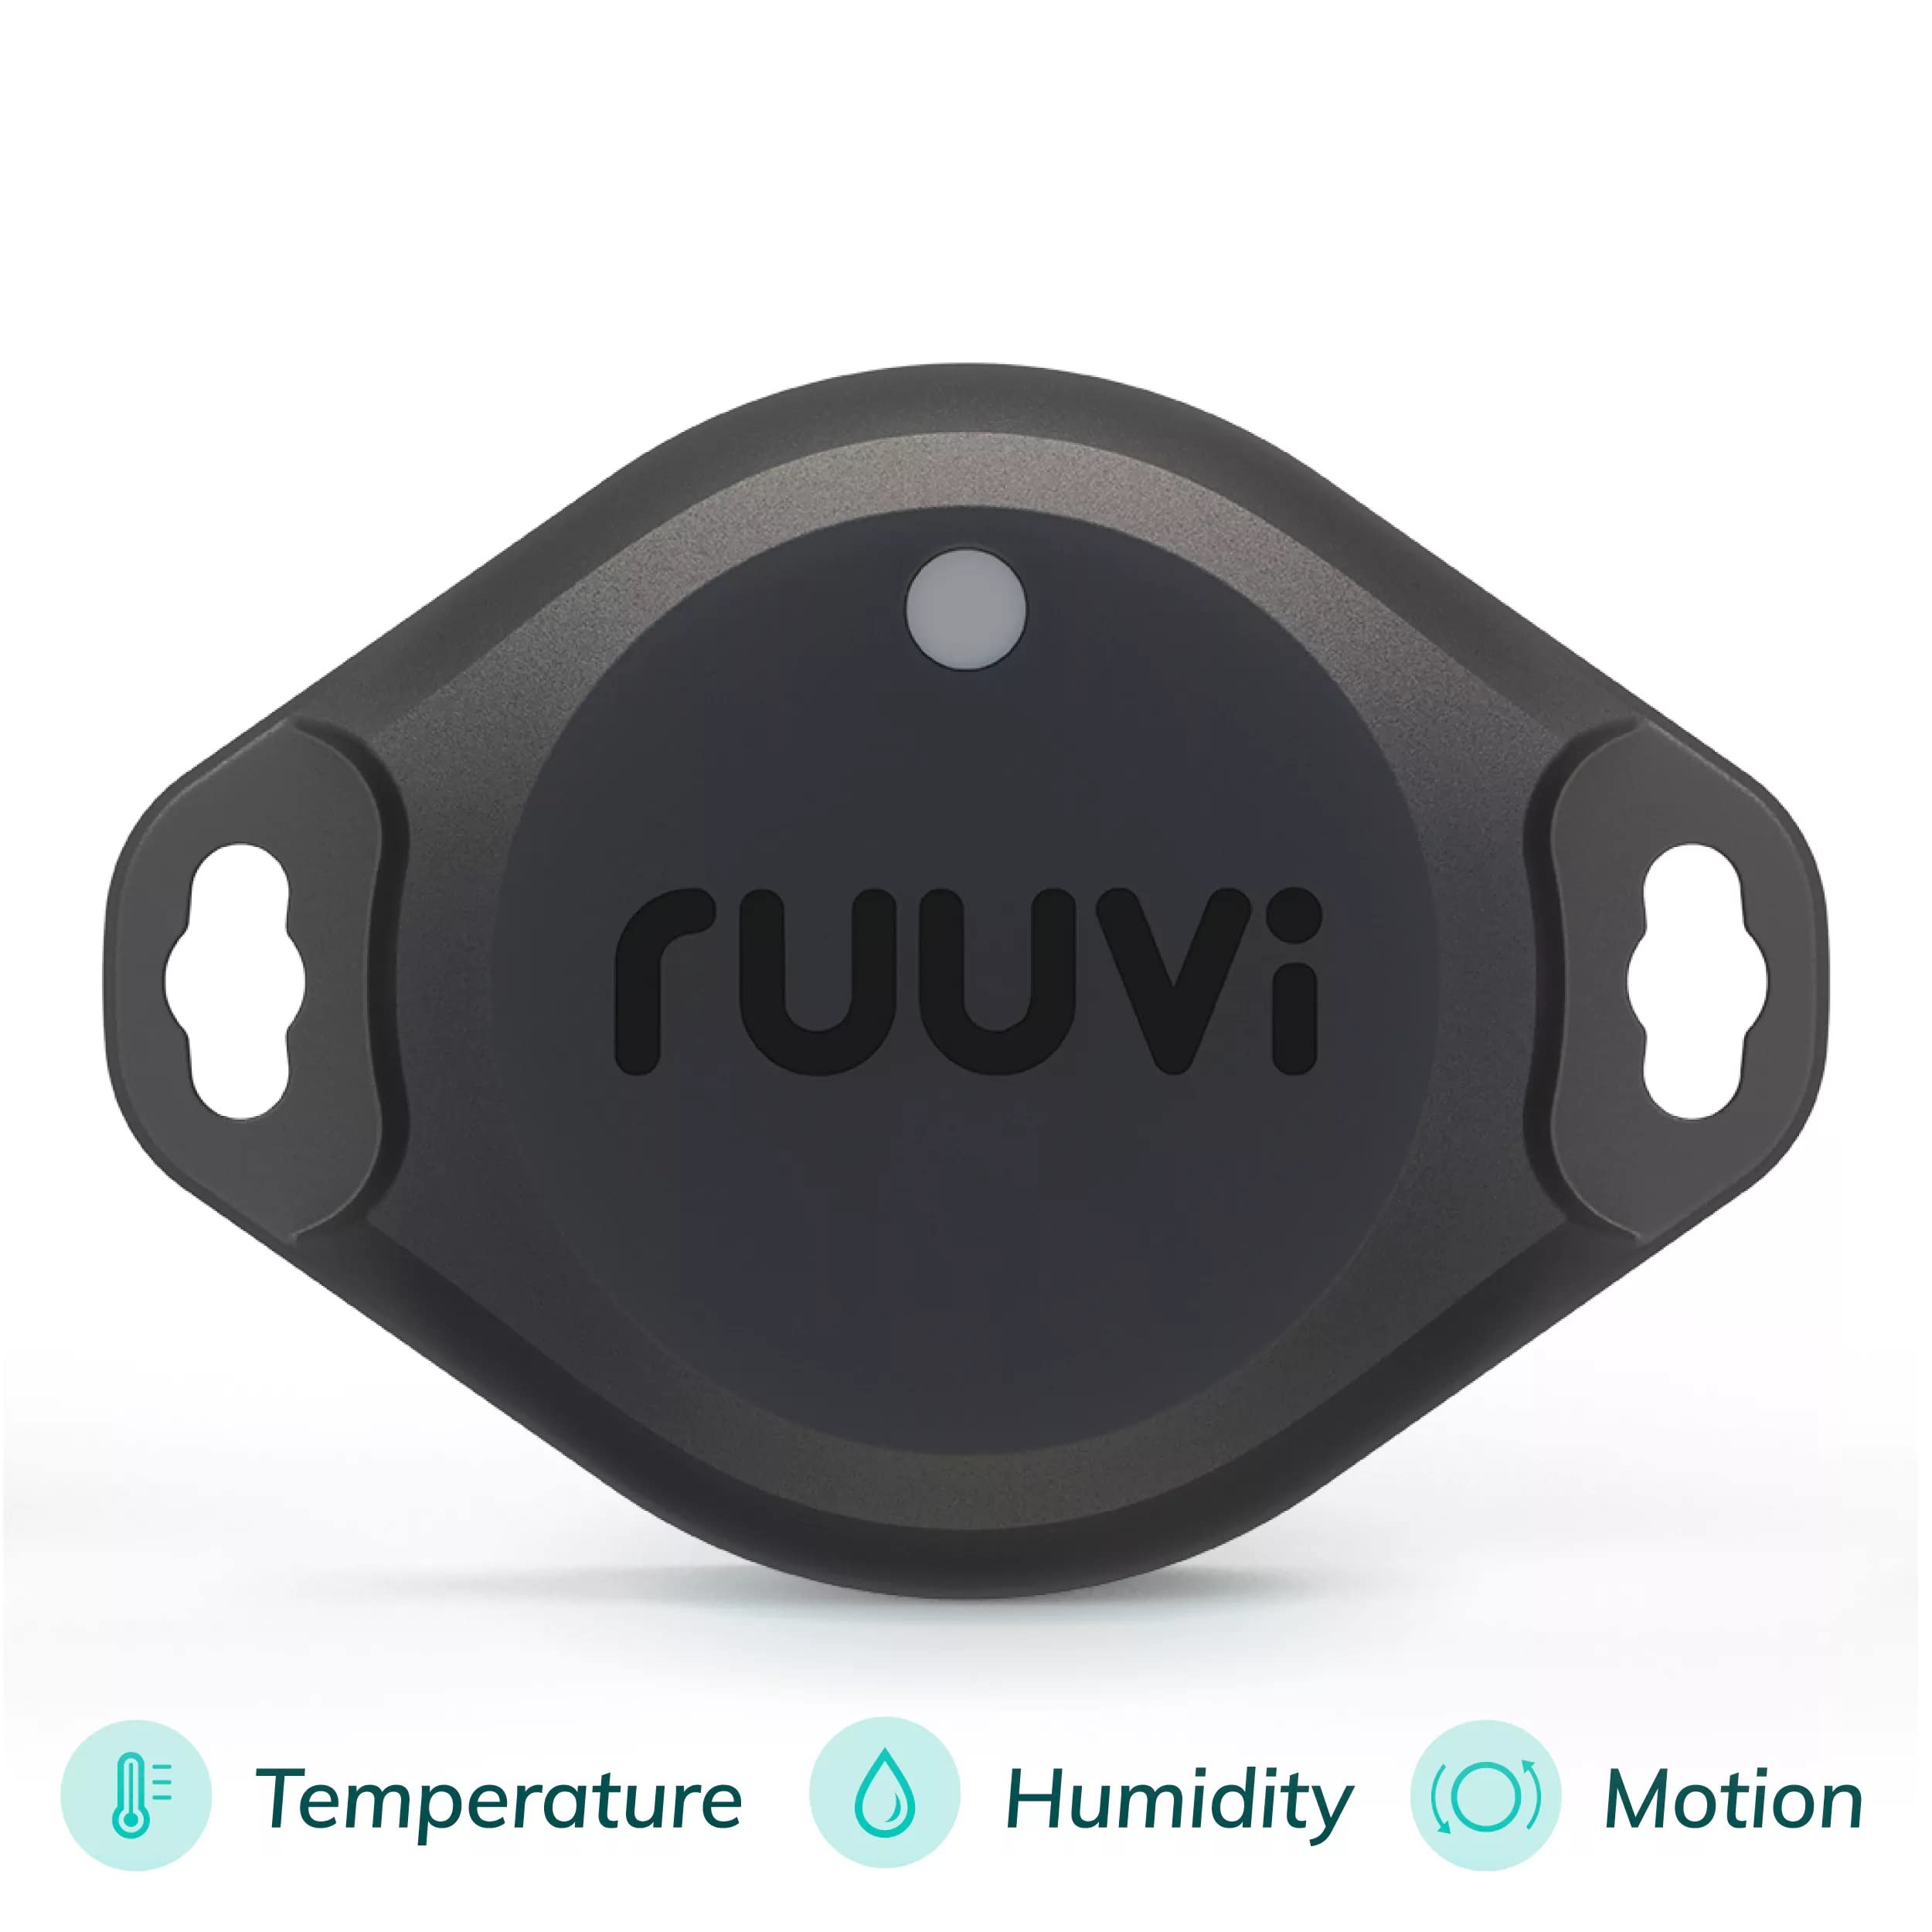 RuuviTag Pro 3in1 Wireless Bluetooth Temperature (°C/°F), Air Humidity and Motion Sensor. Alerts & History. Free Android/iOS apps. Integrates with Victron, Homey, and Home Assistant. Made in Europe.